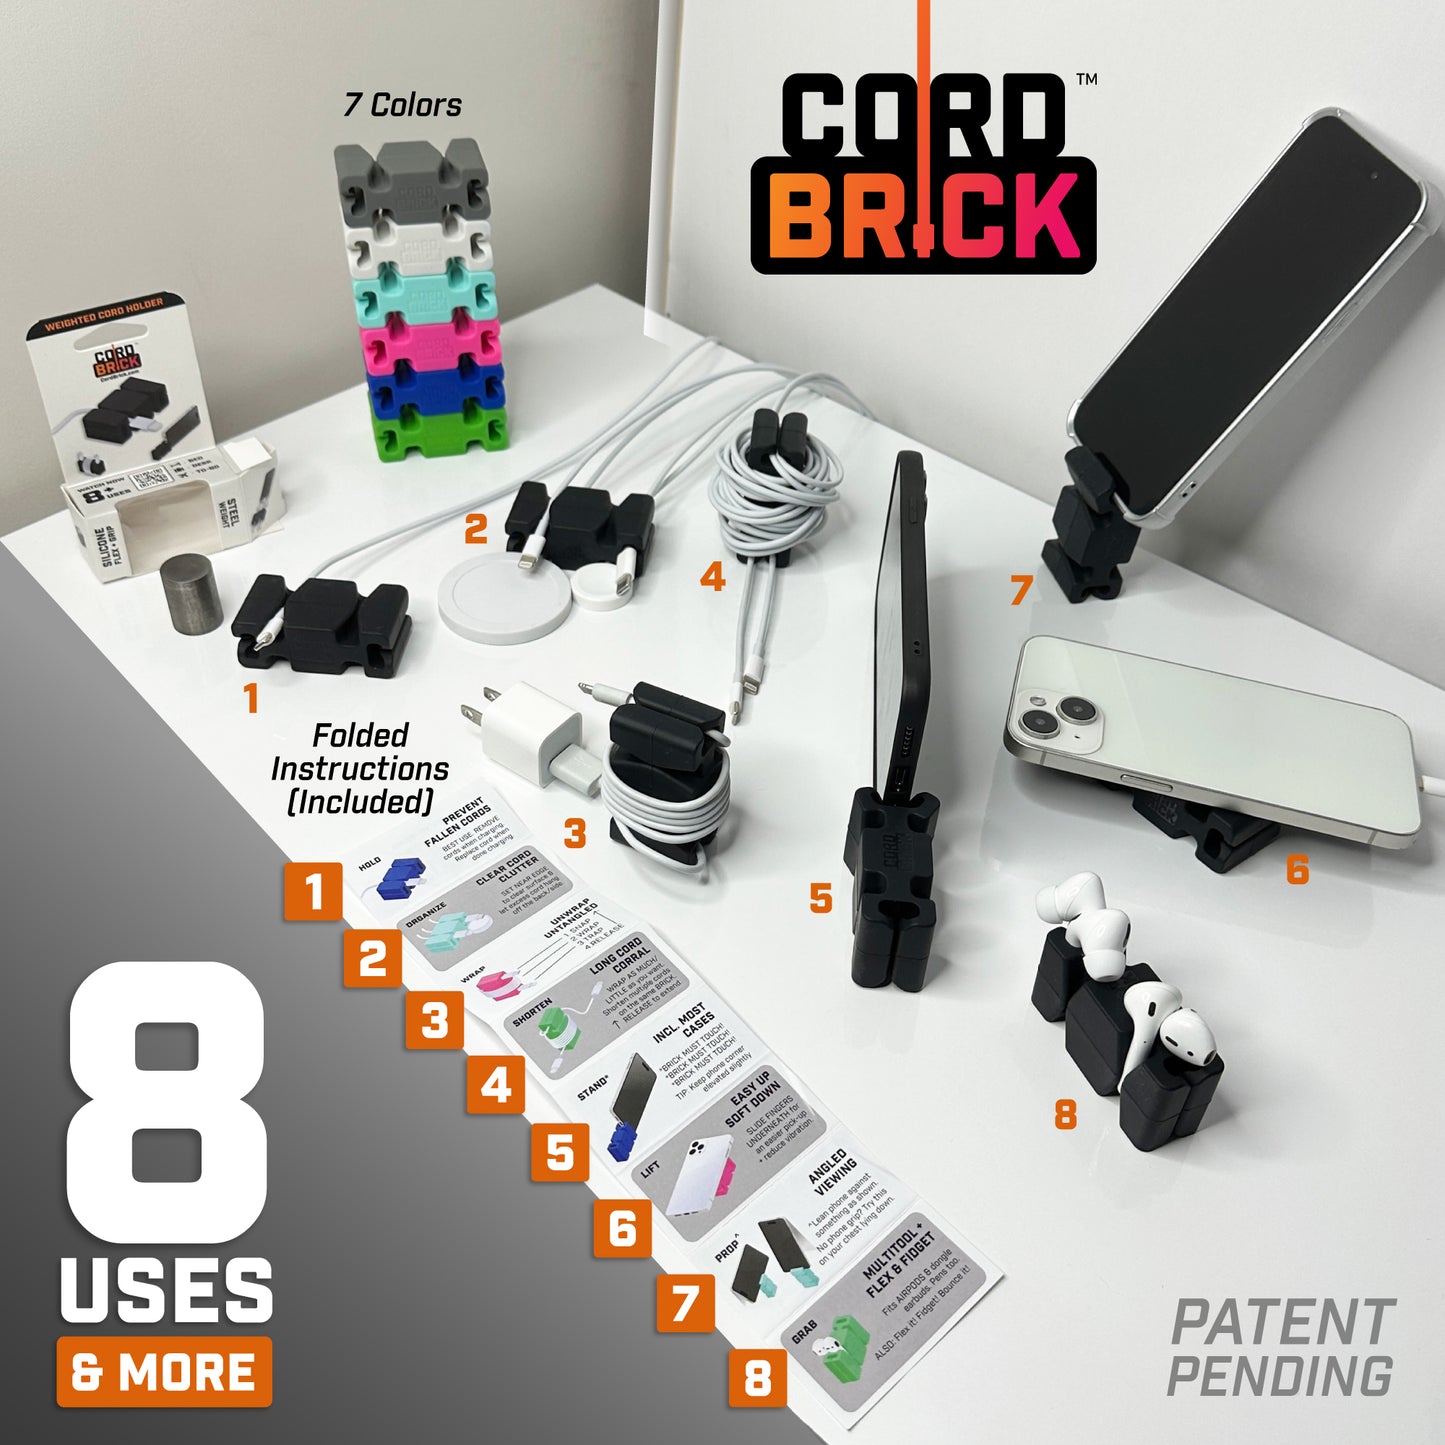 CordBrick™ Version 2.0 Weighted Cord Holder, Cable Management Device, Phone Accessory